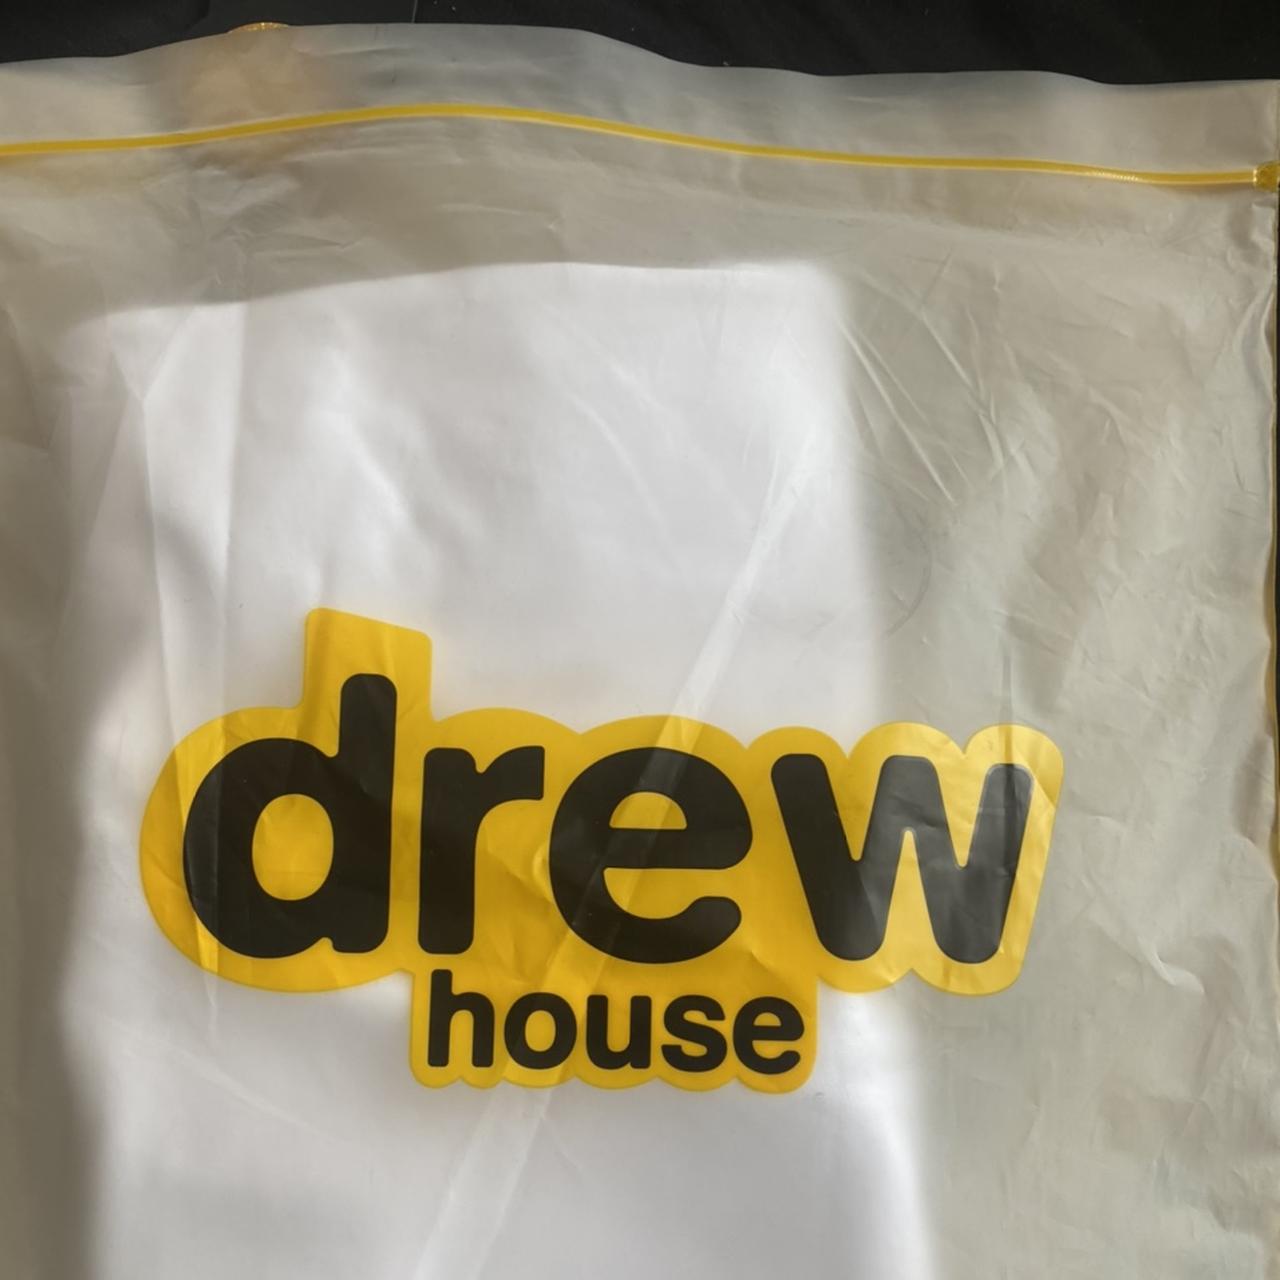 DREW HOUSE MAPLE LEAFS CREW SHIRT RARE FIND - ONLY - Depop